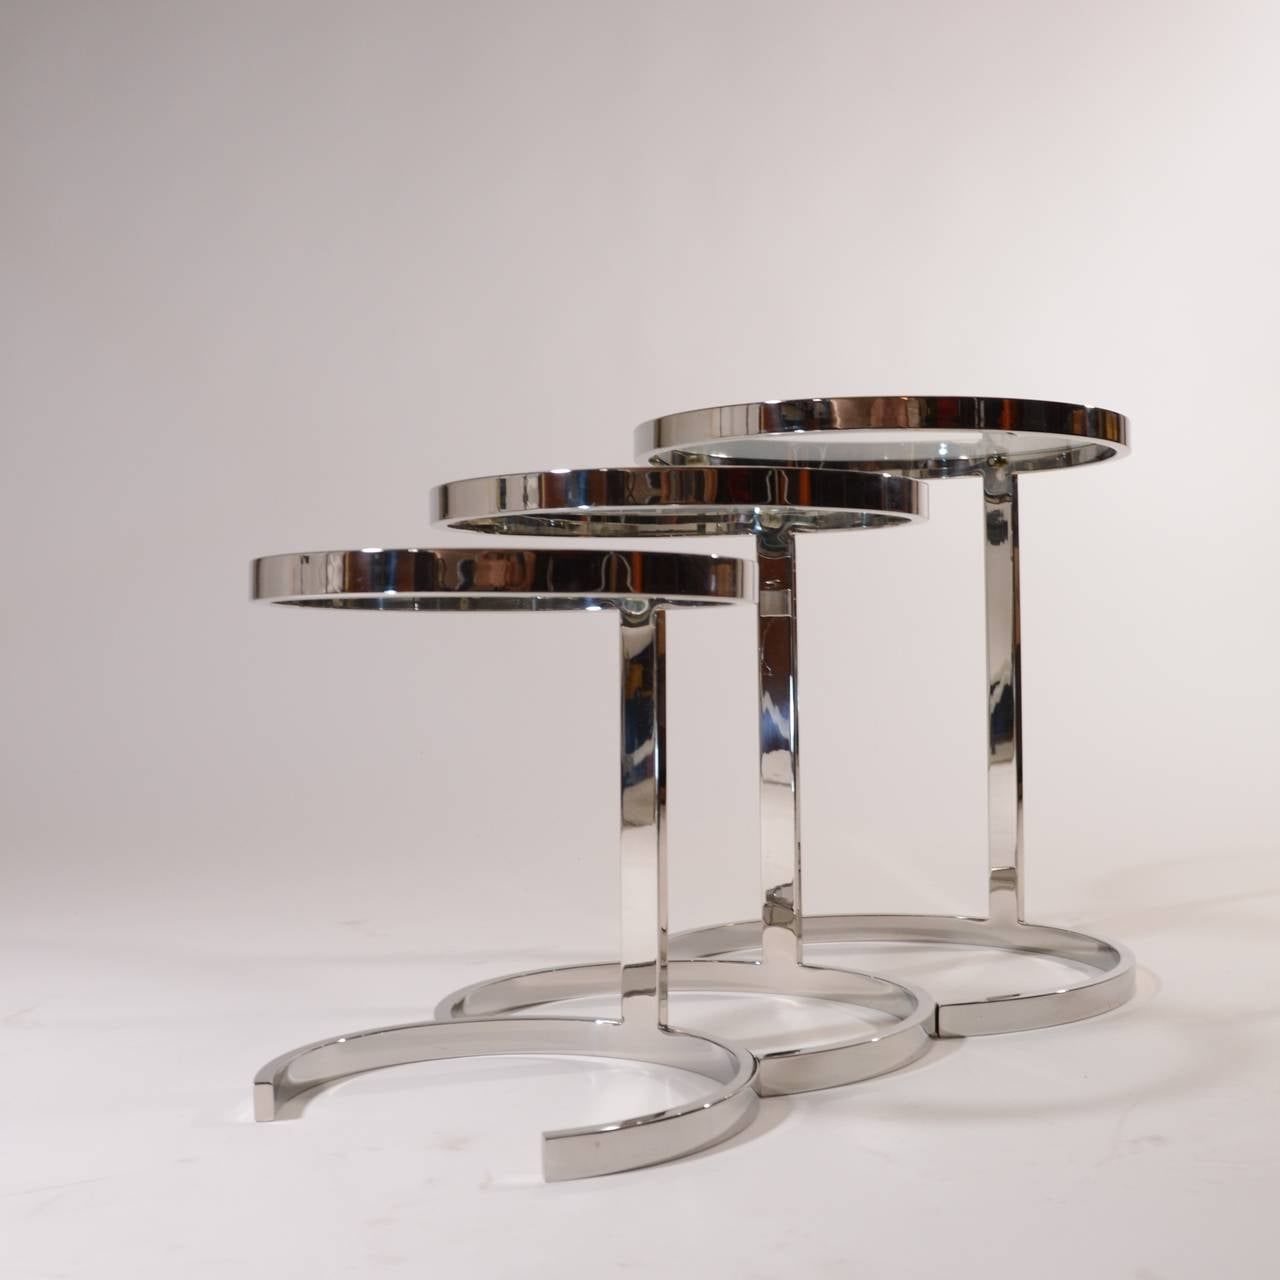 Glass And Stainless Steel Cocktail Tables Pertaining To Recent Set Of 3 Nesting Stainless Steel And Glass Nesting Tablesbrueton (View 3 of 10)